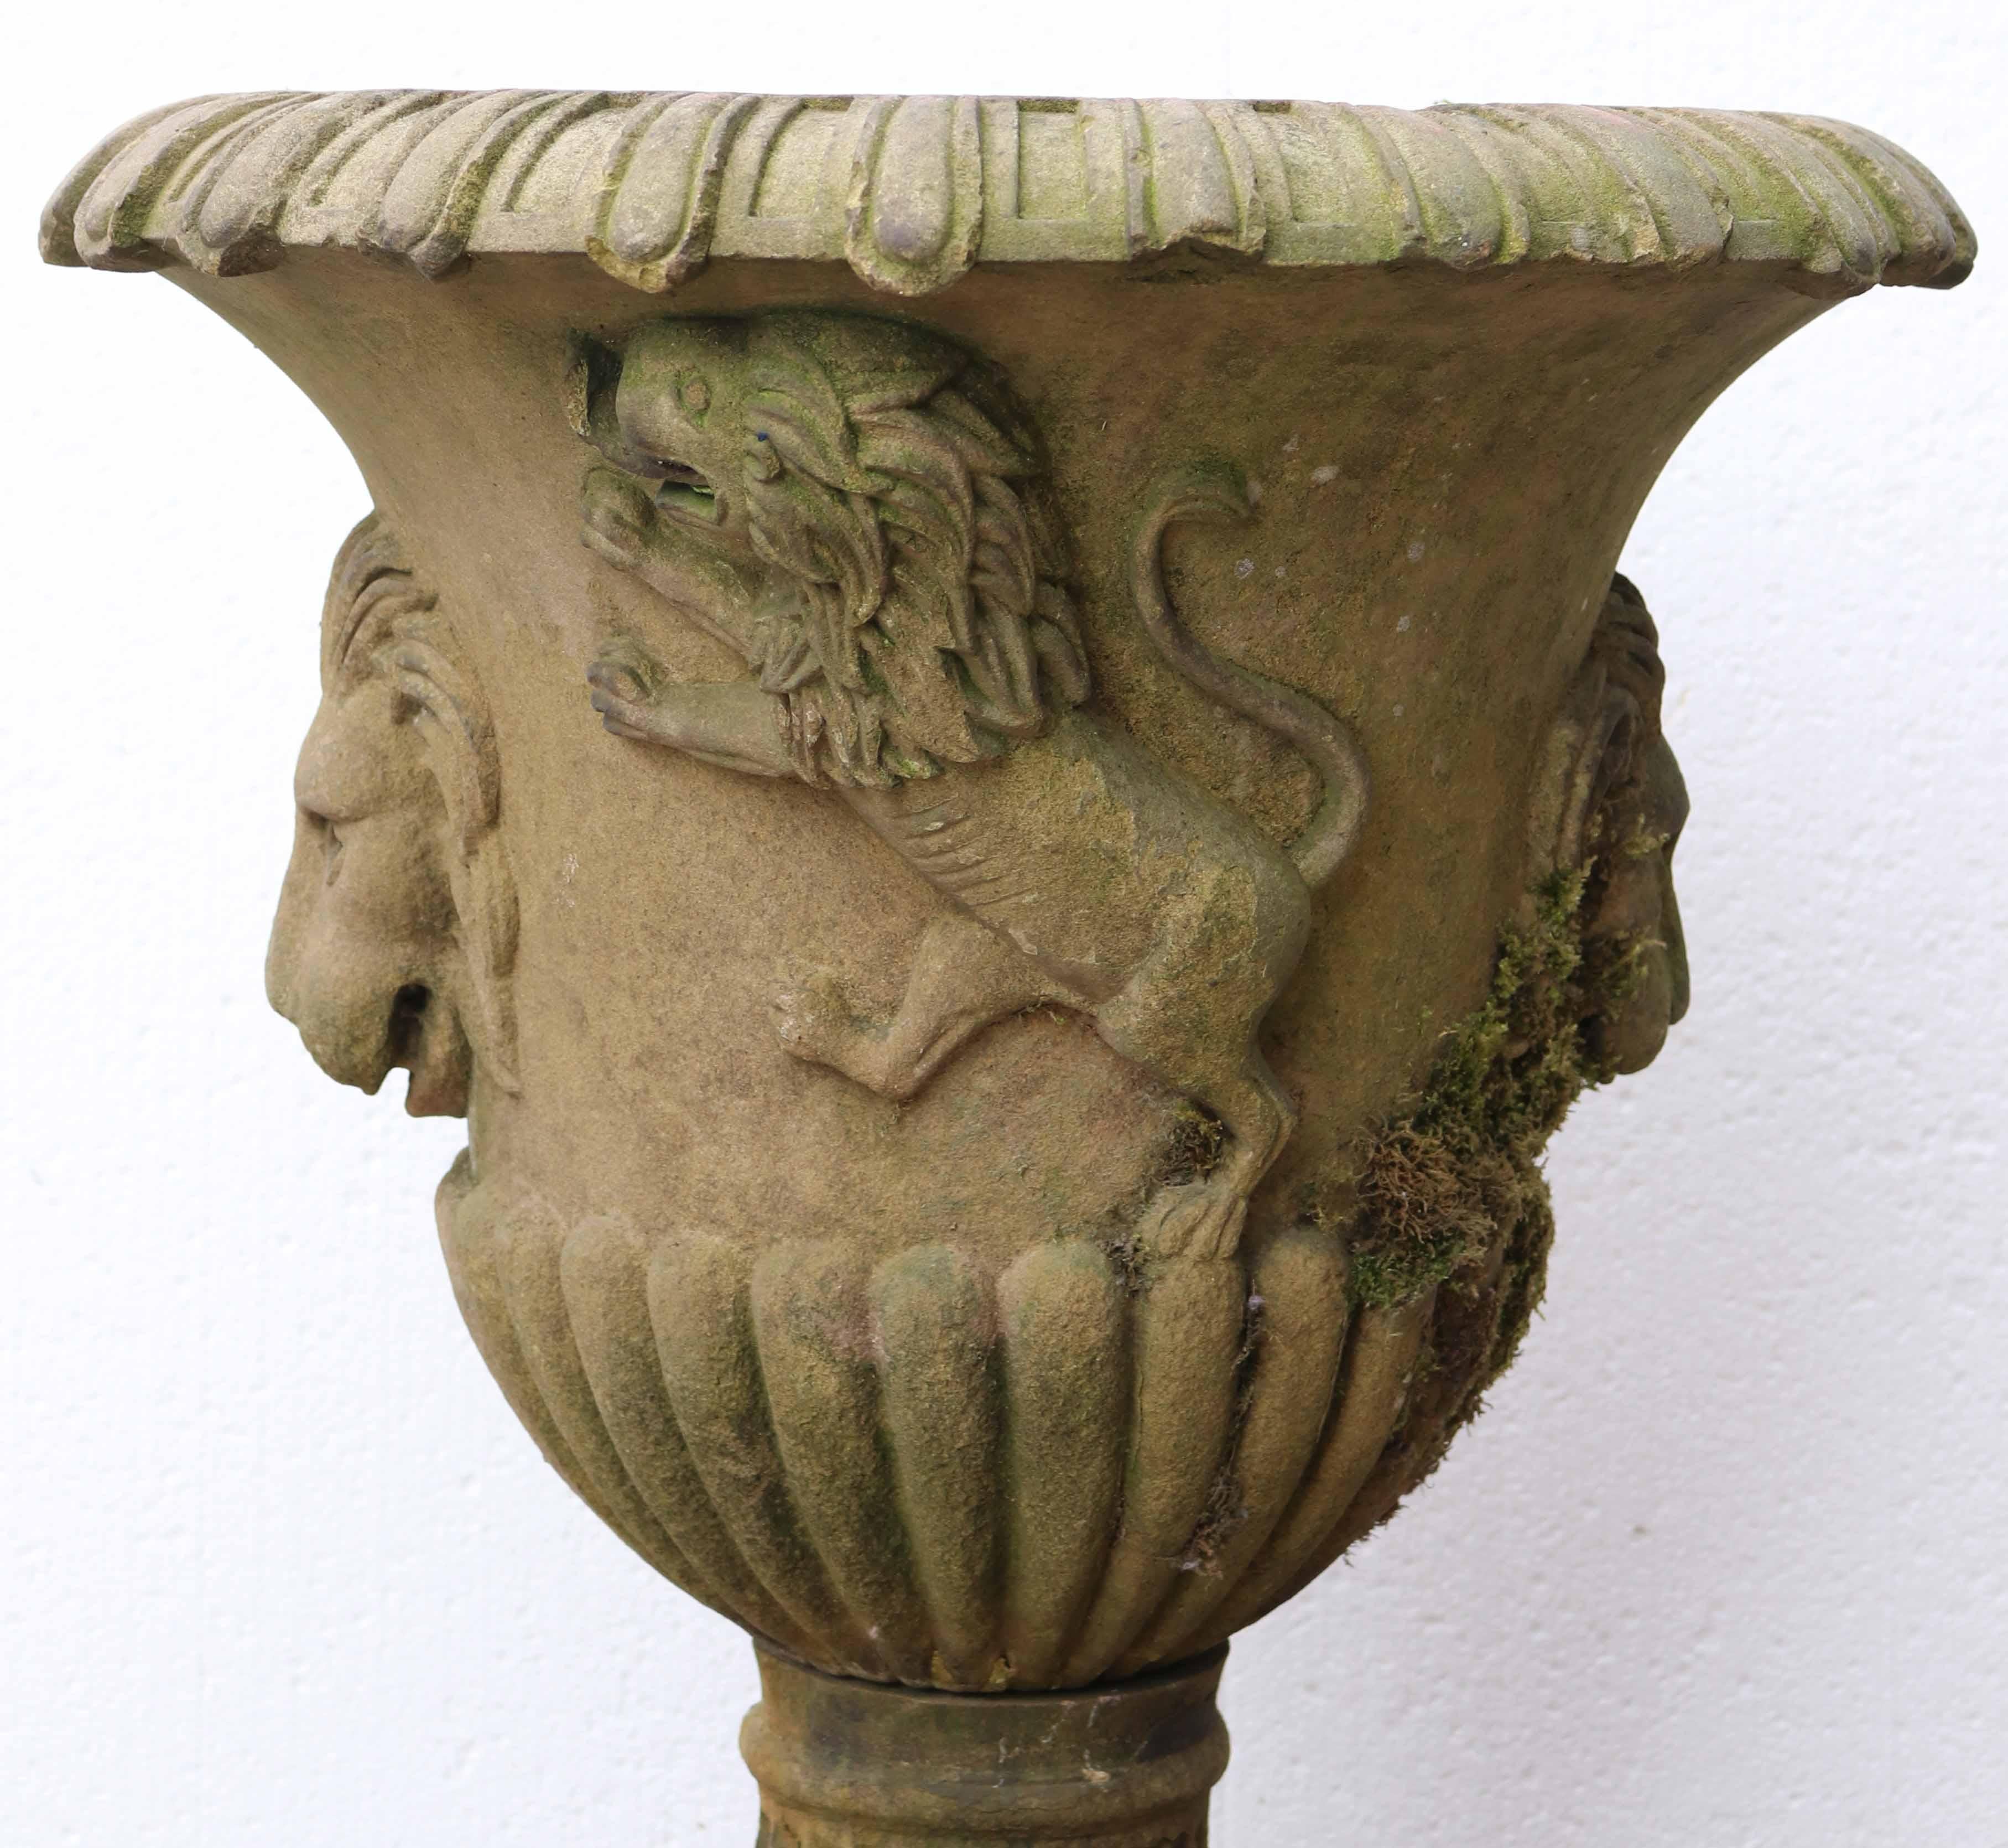 An early 19th century antique English carved Yorkstone urn, hand-carved with rampant lions, lion masks and gadrooning on a fluted socle base. This impressive 200-year-old garden urn dates from the Georgian era, the durable sandstone transformed by